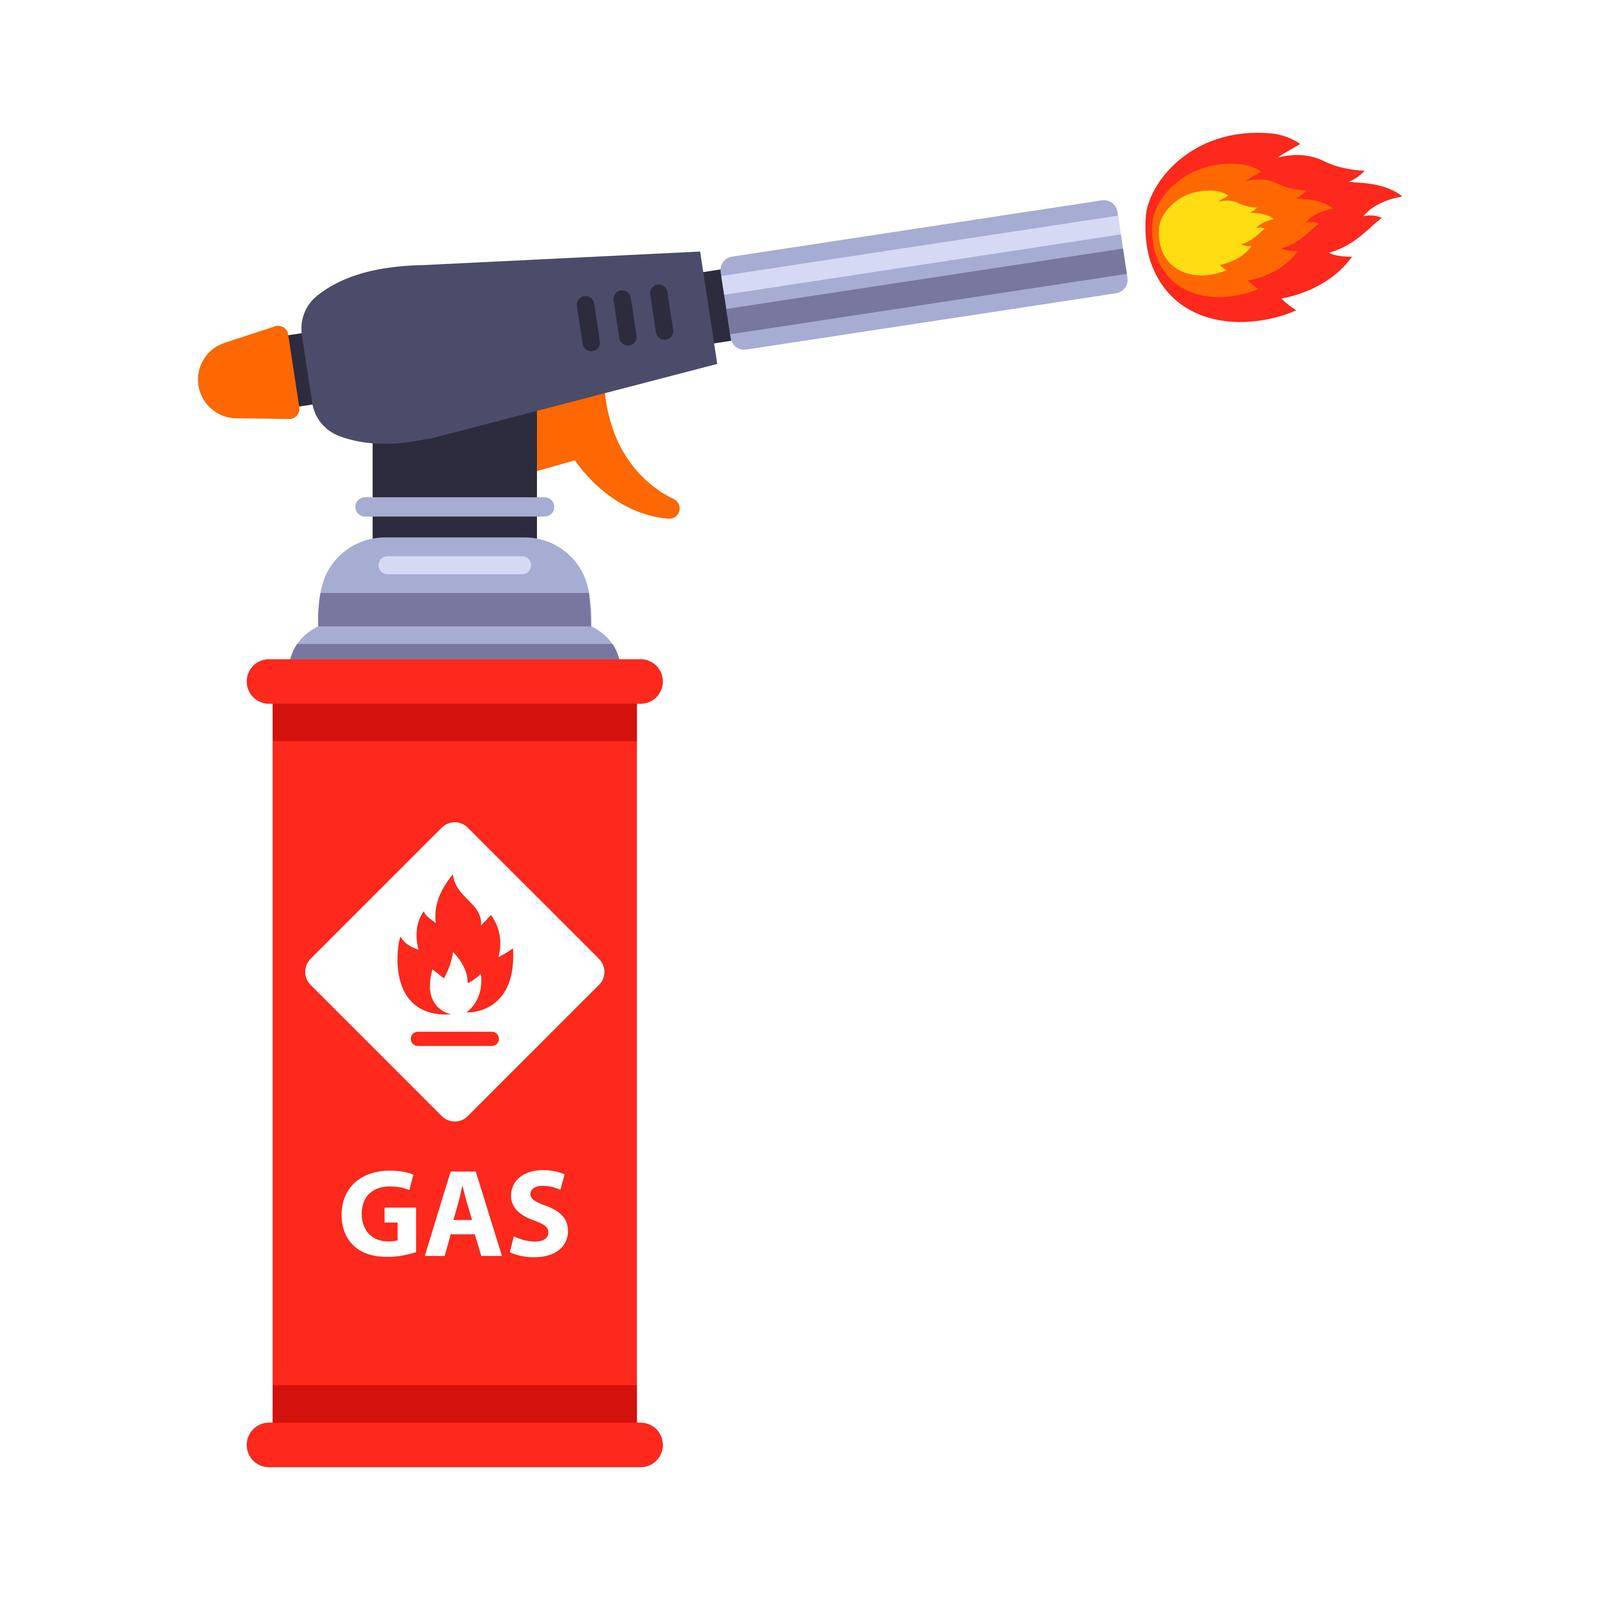 red gas spray emits a flame. Flat vector illustration isolated on white background.